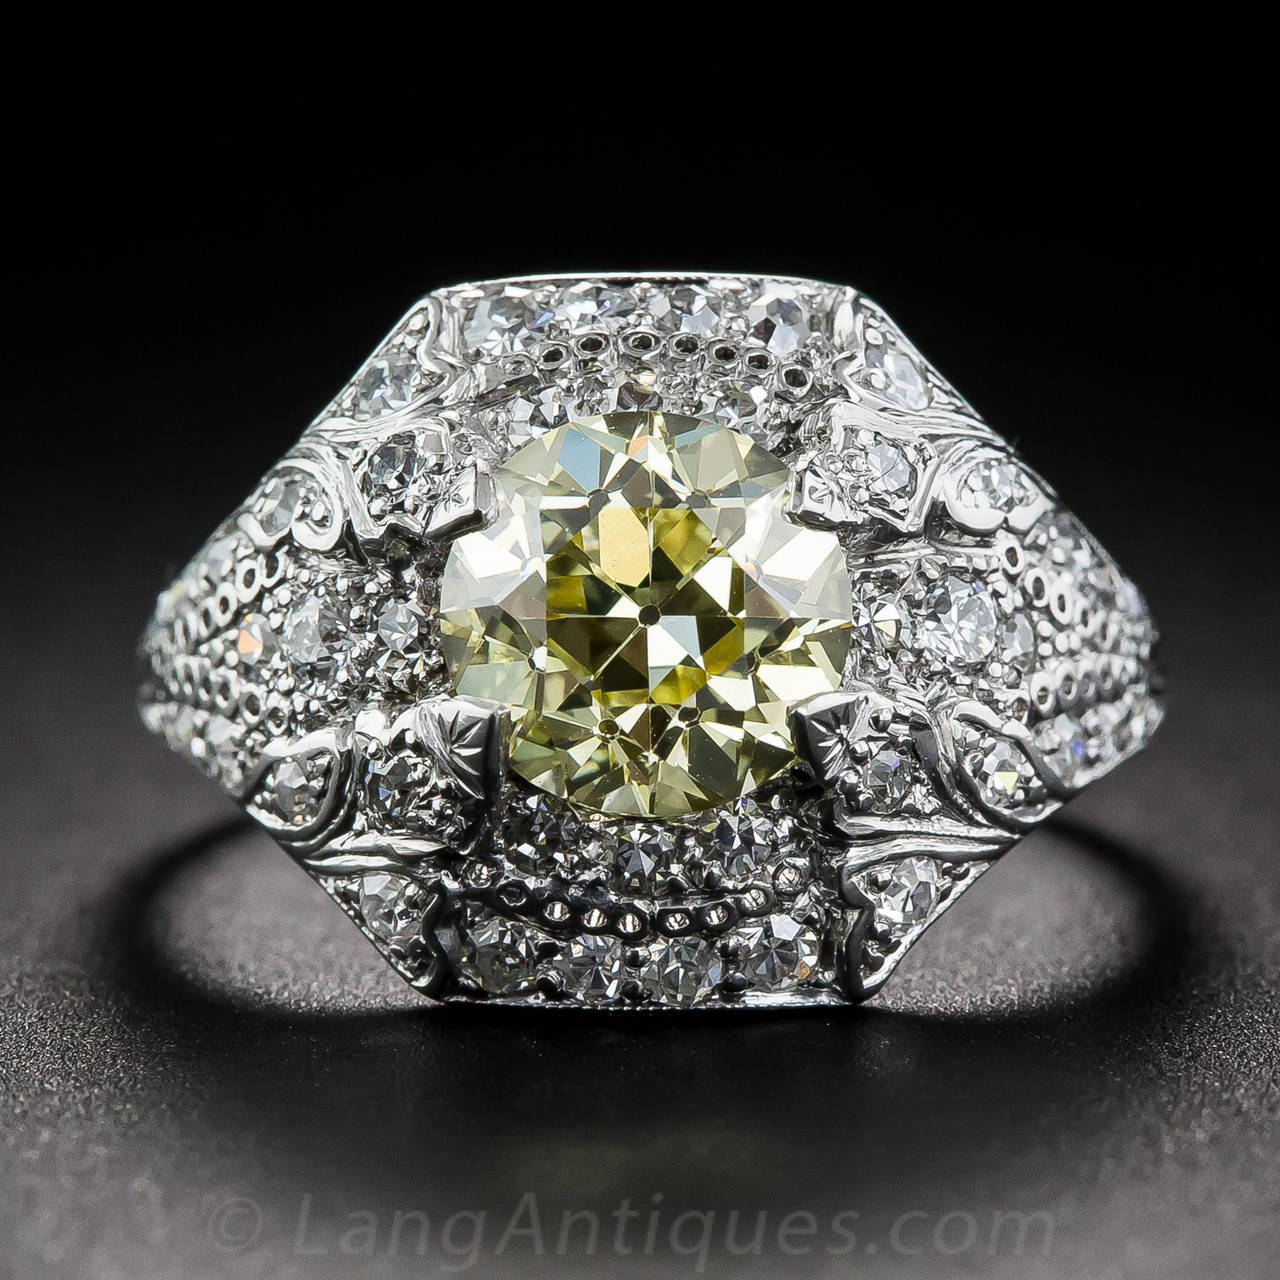 This spectacular Art Deco ring, circa 1920s-30s, showcases a sensational, sunshine bright, natural Fancy Yellow European-cut diamond, weighing 1.76 carat. We've owned and examined many Fancy Yellow and Fancy Intense Yellow diamonds over the years